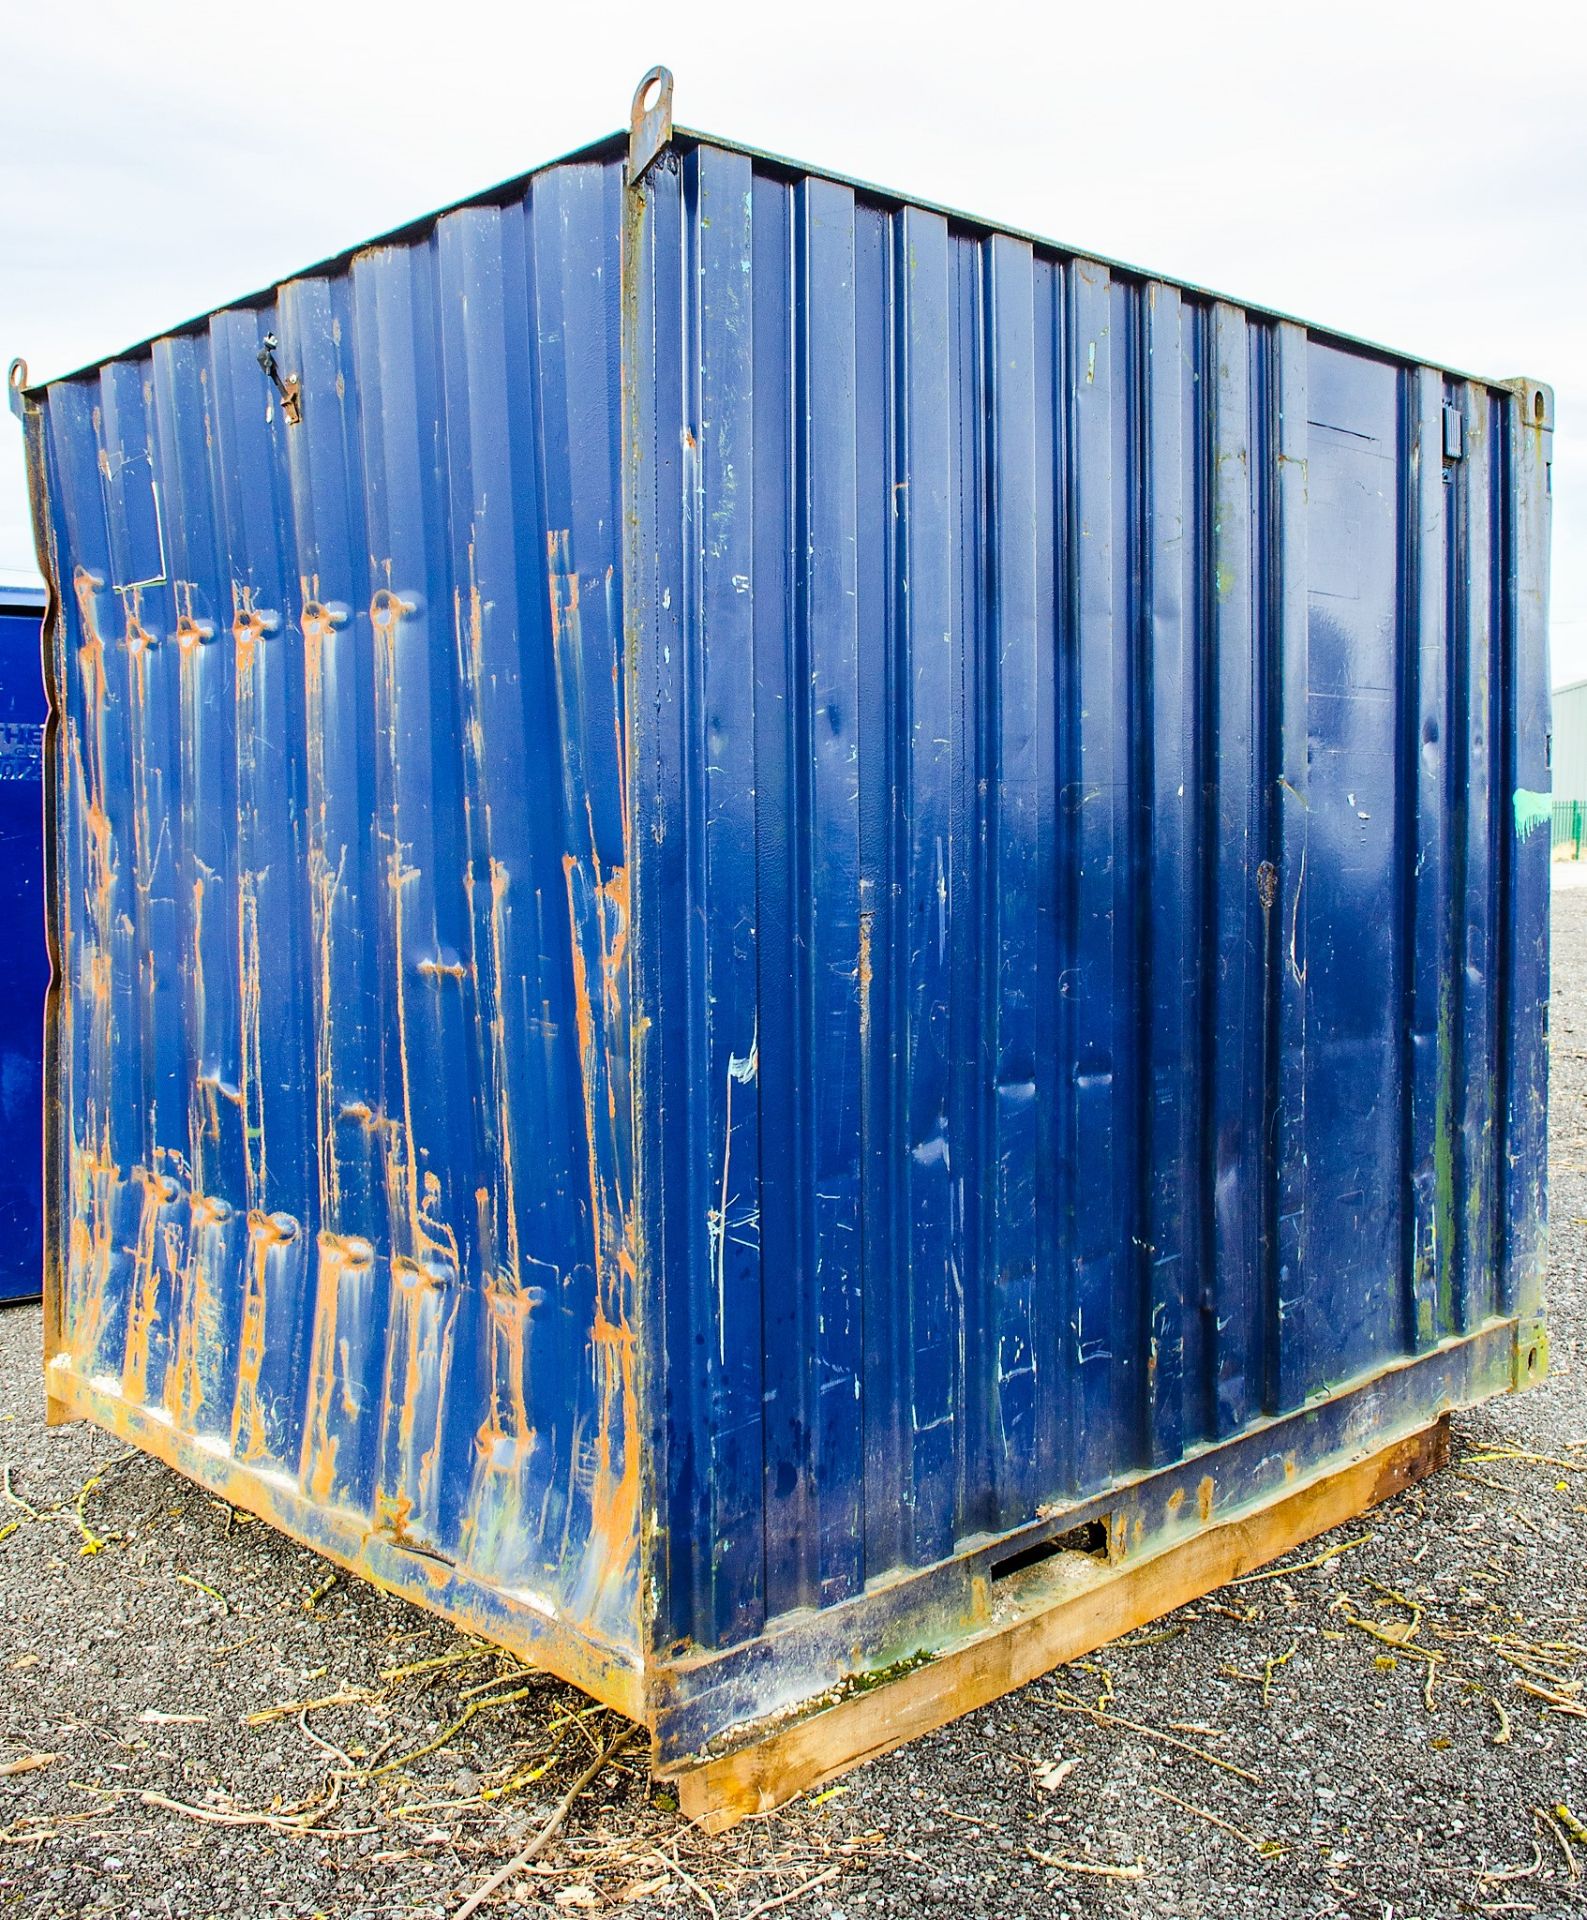 10 ft x 8 ft steel container - Image 3 of 4